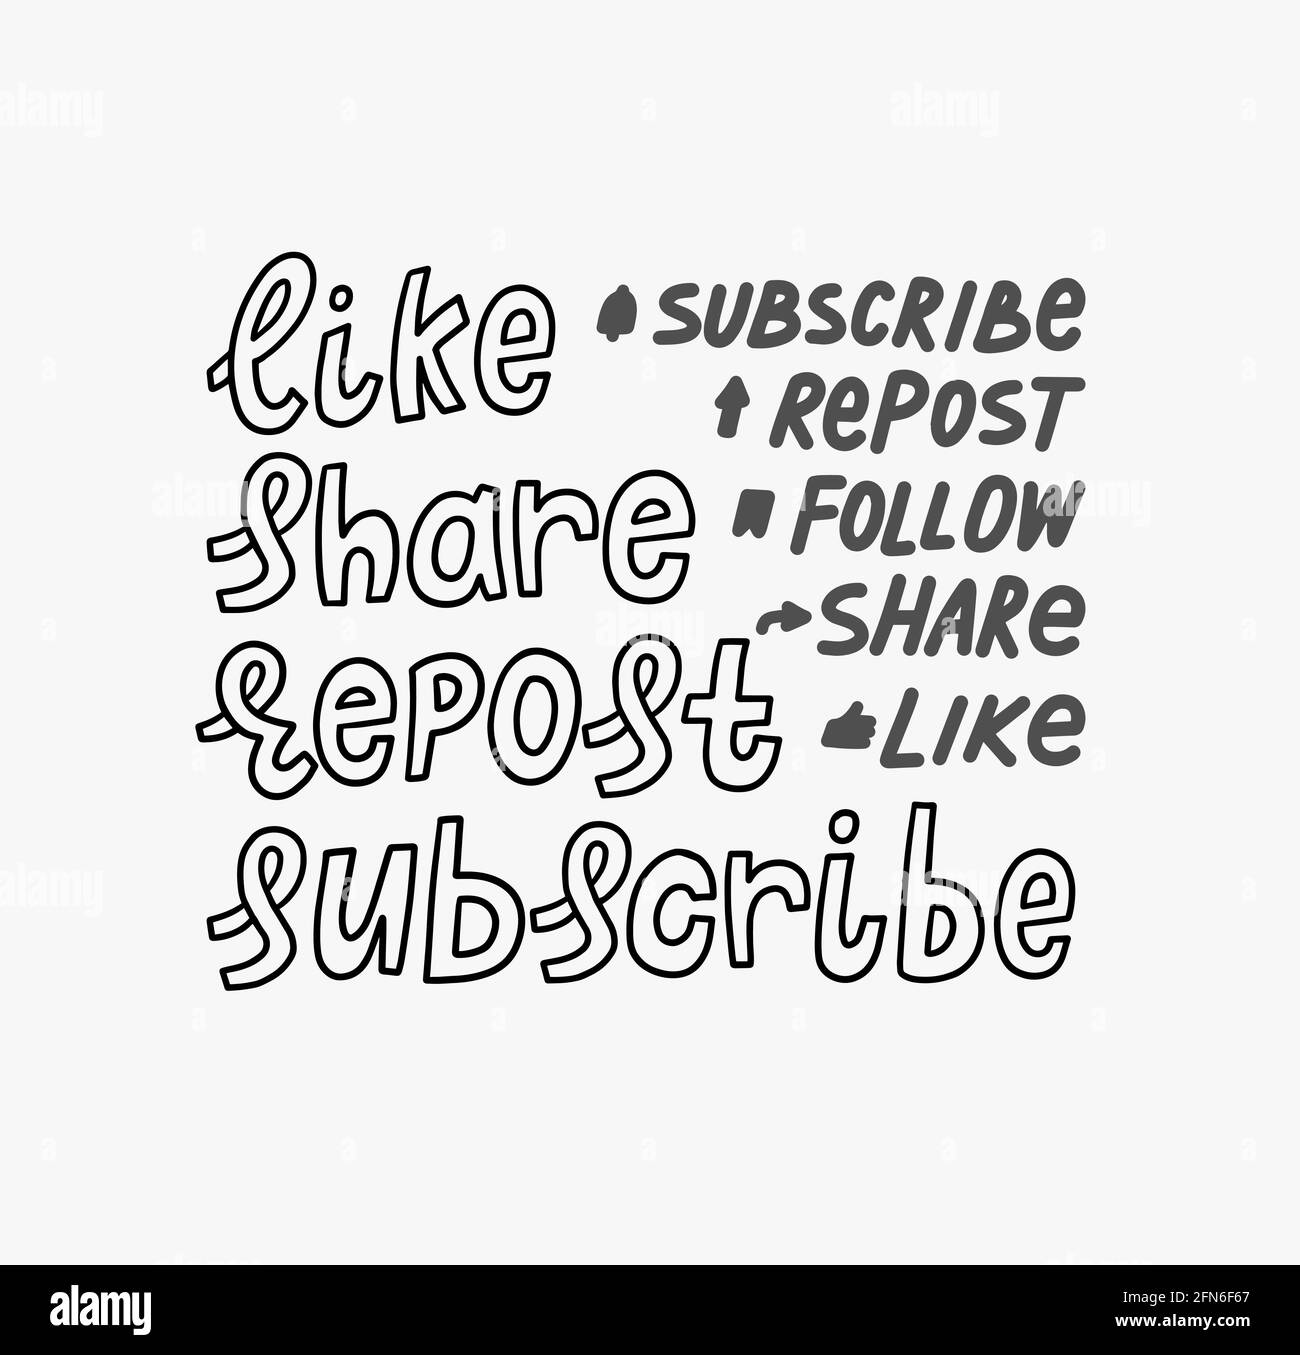 Like Share Repost Subscribe Follow doodle hand lettering stickers. quote subscribe to channel, blog. Social media background. Marketing. Vector Stock Vector